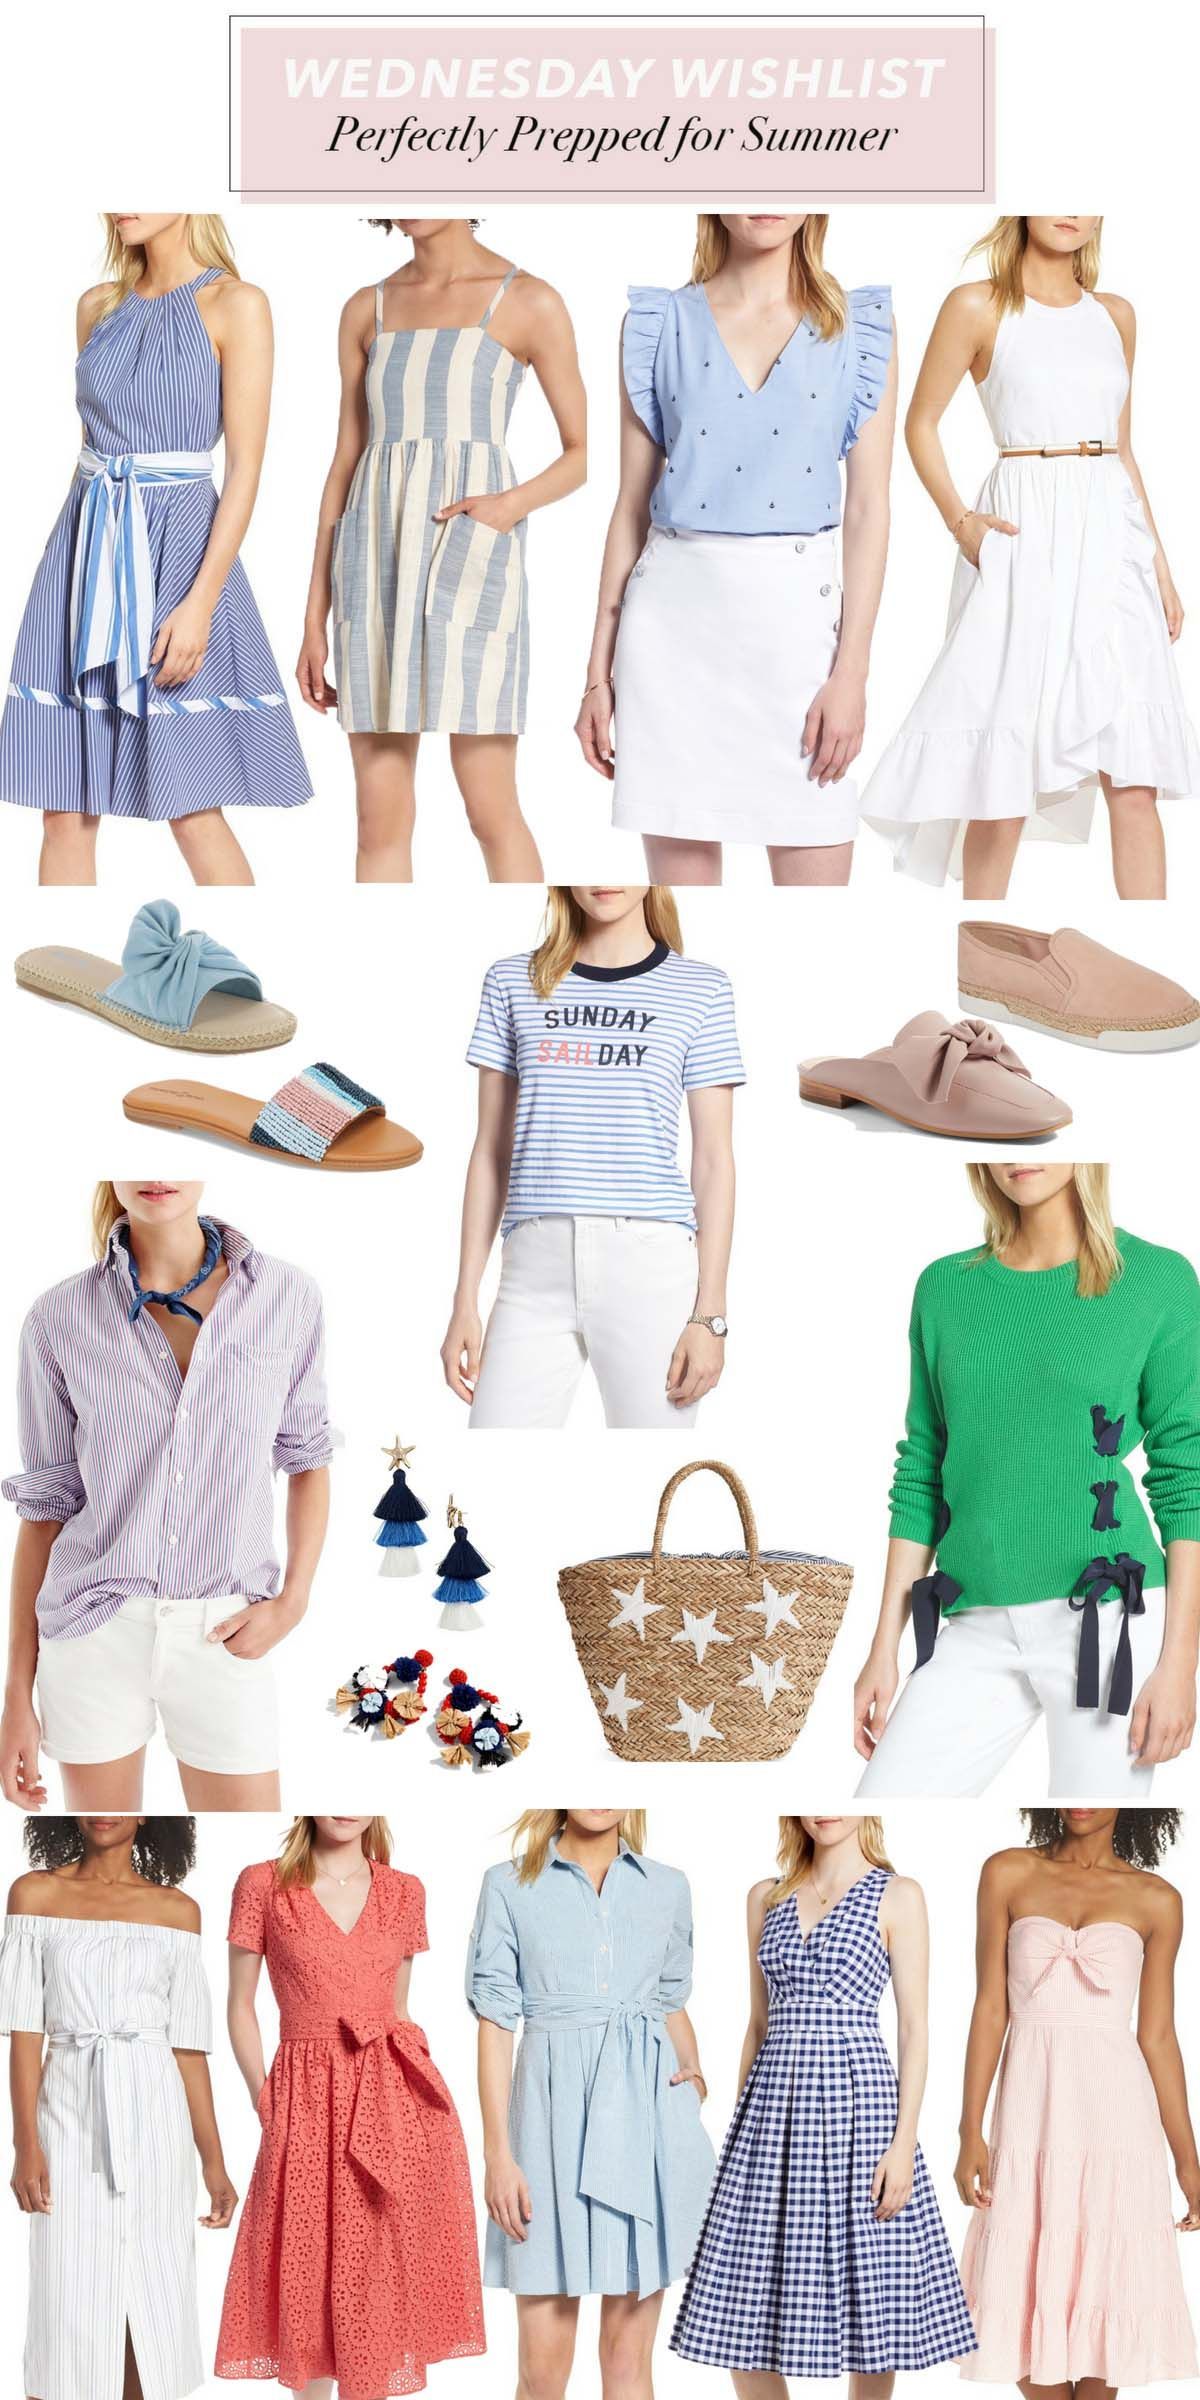 Cape Cod Inspired Outfits | Wednesday Wishlist - Cape Cod Inspired Outfits | Wednesday Wishlist -   16 style Preppy summer ideas